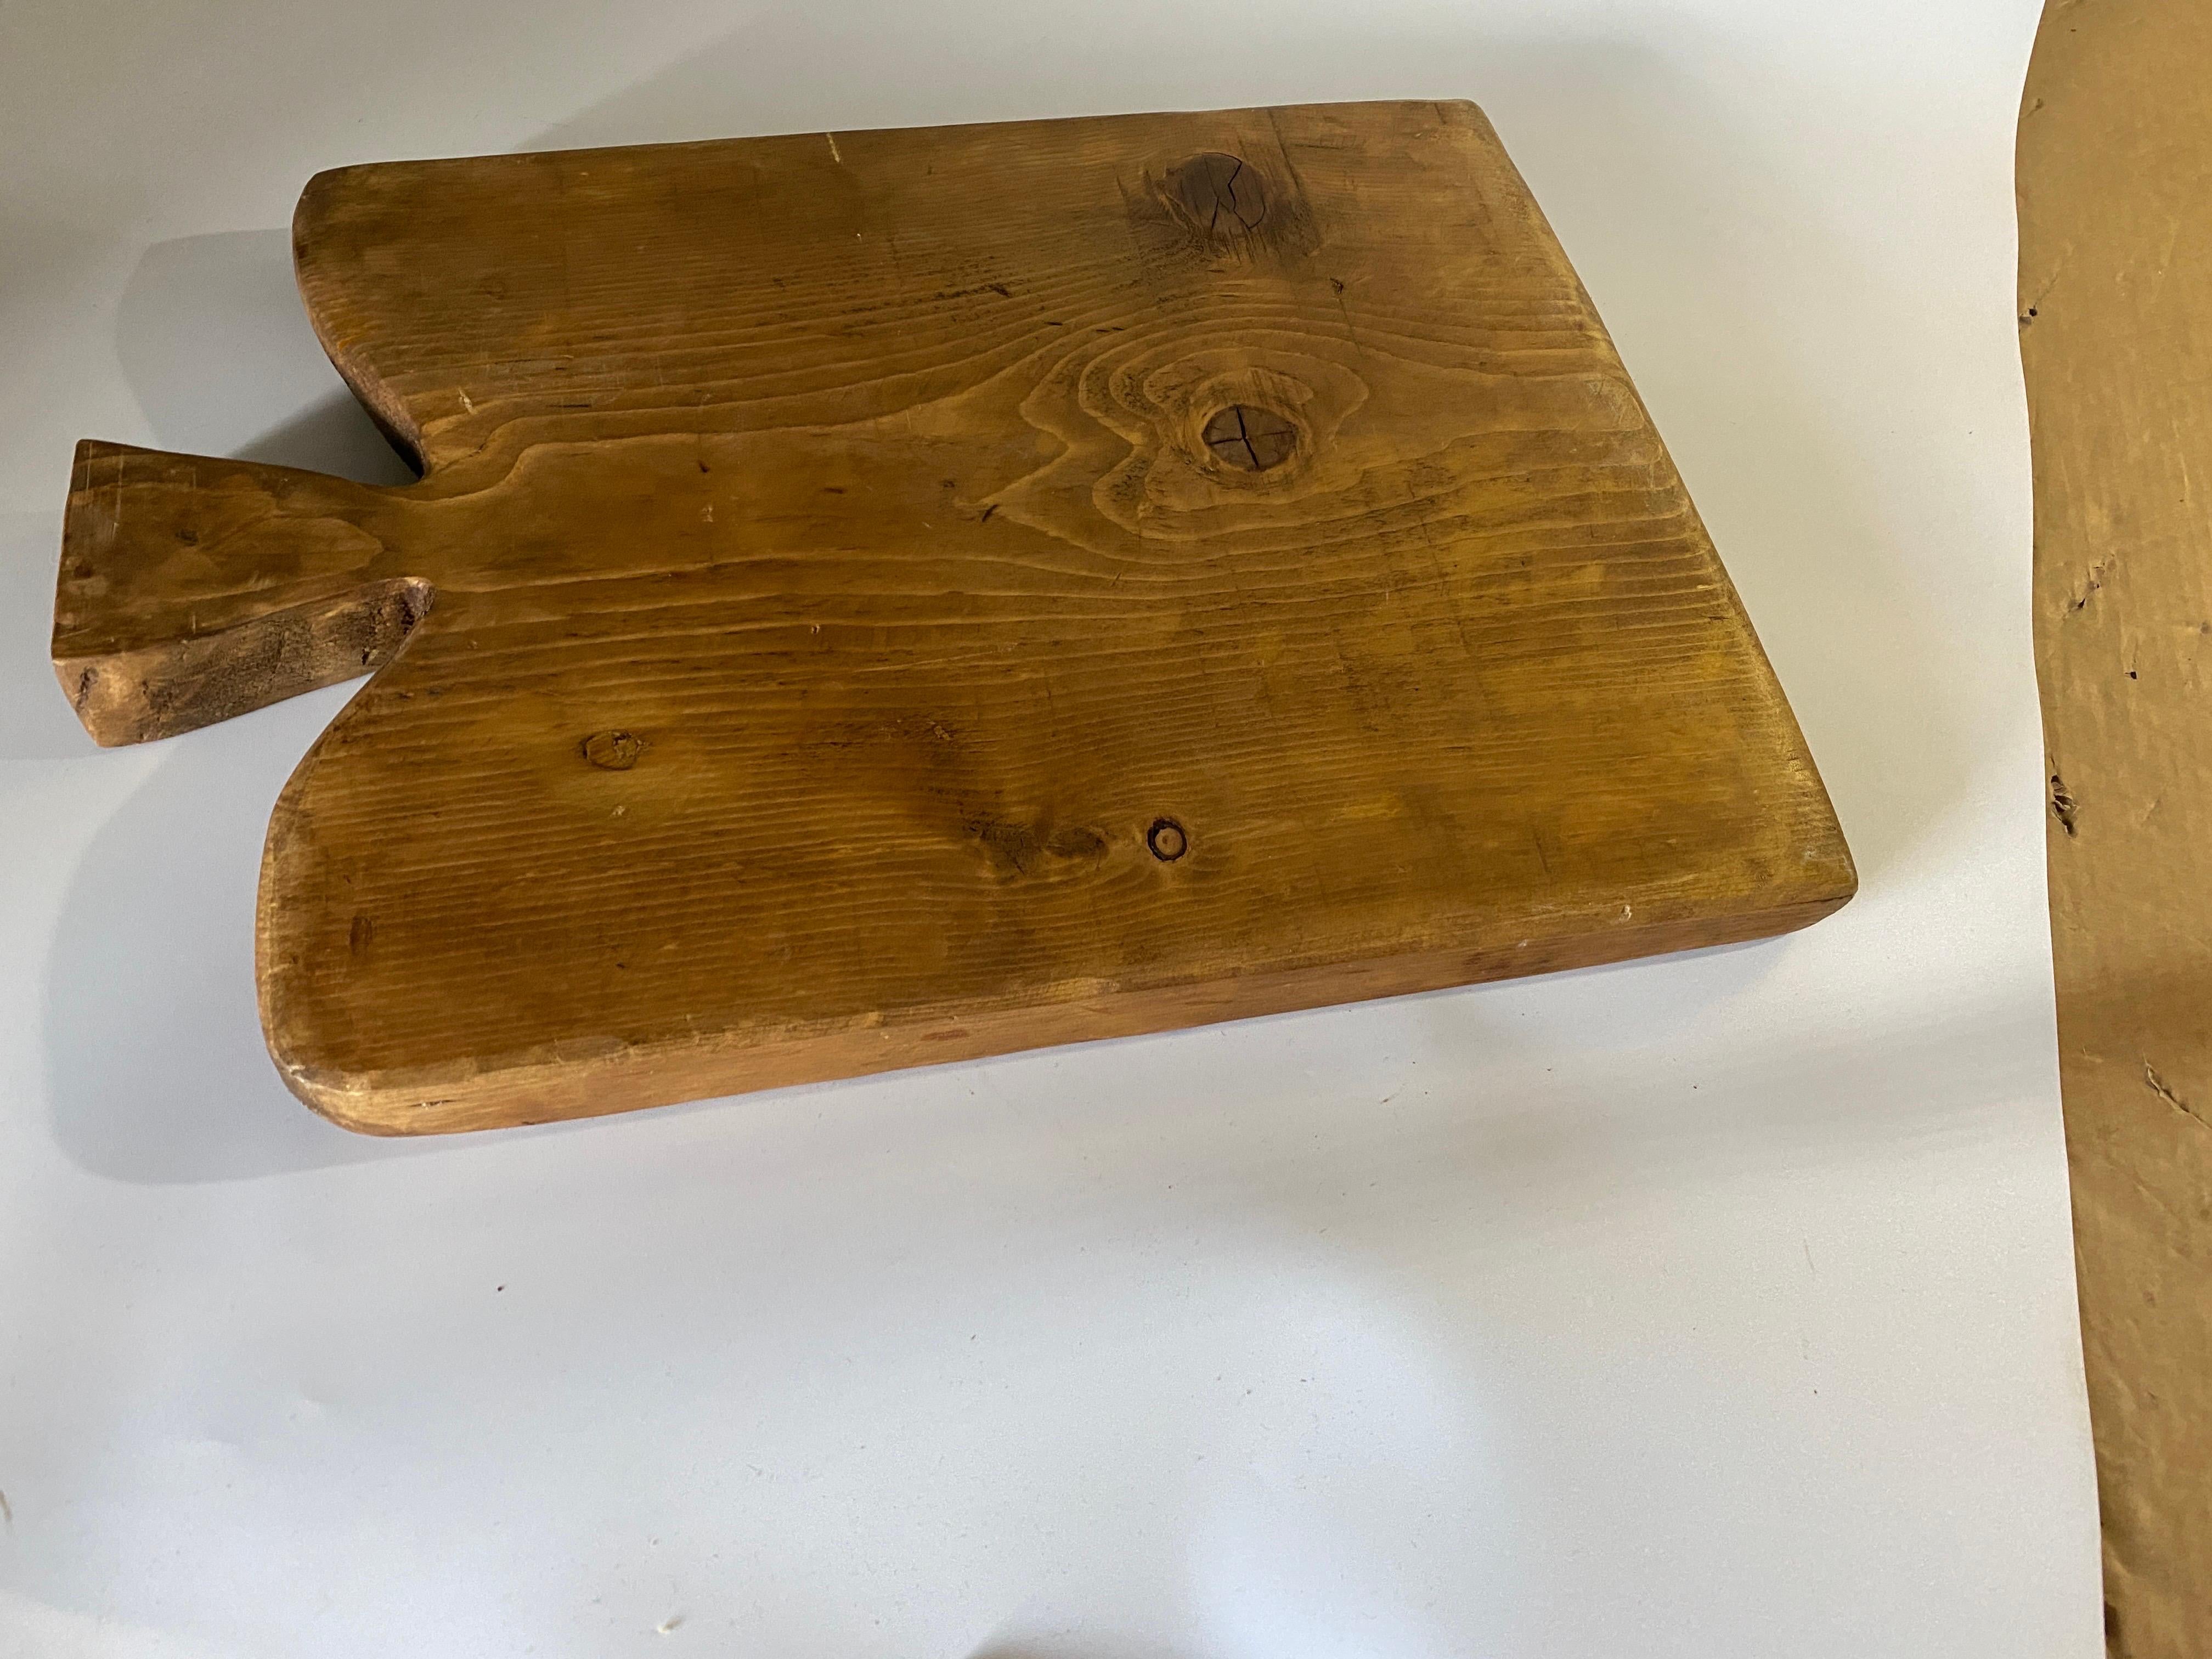 Century, Wooden Chopping or Cutting Board, Old Patina, Brown Color, French 19th  1